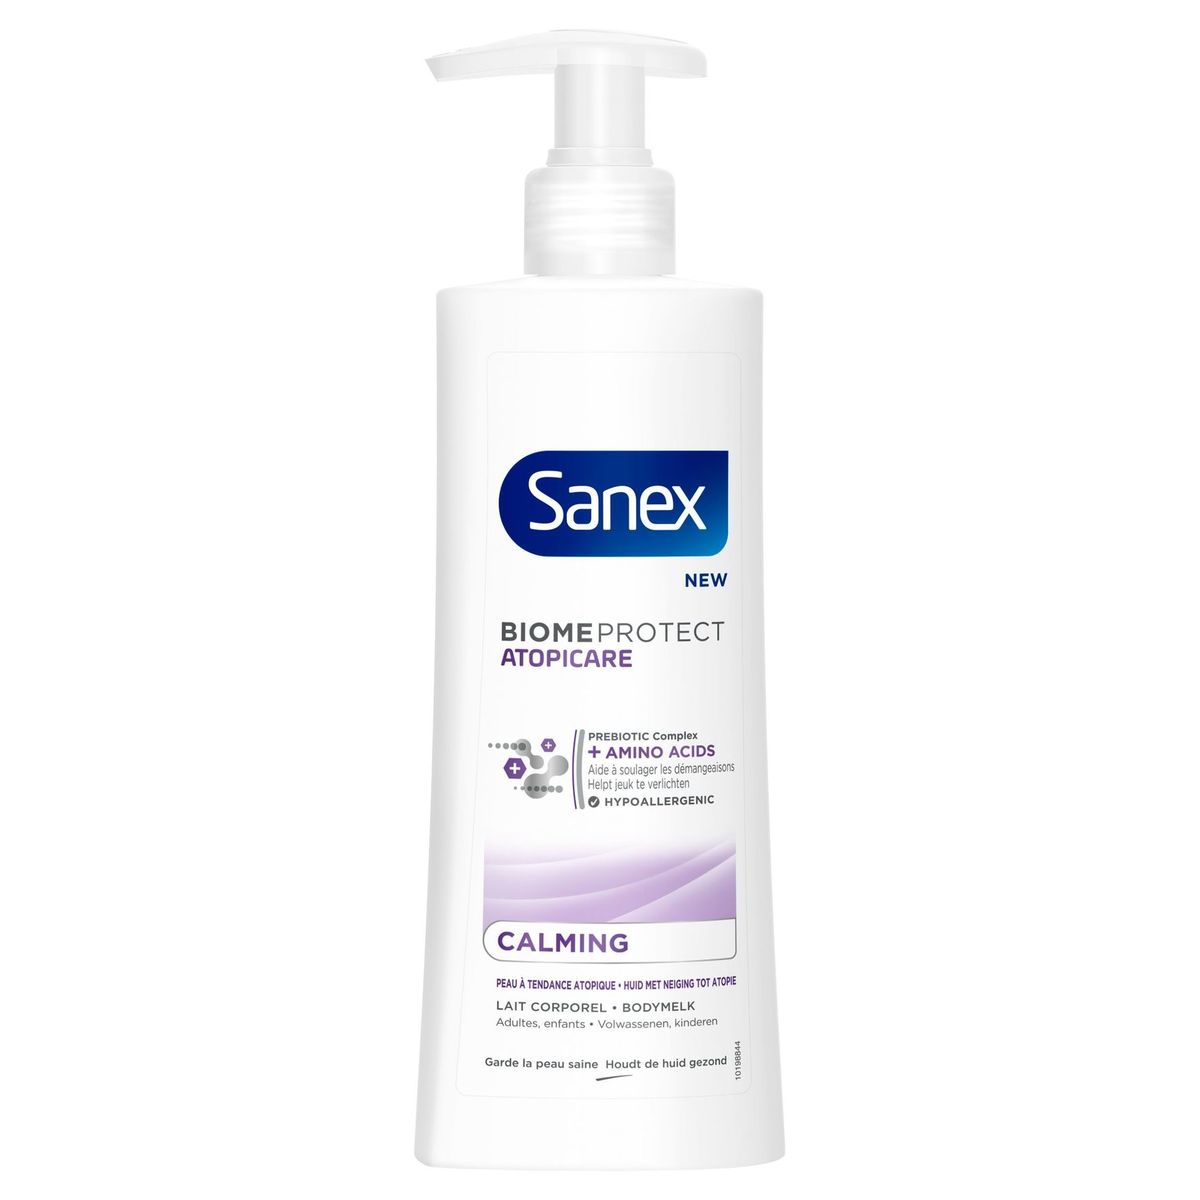 Sanex BiomeProtect Atopicare Calming Body Lotion - 250ml